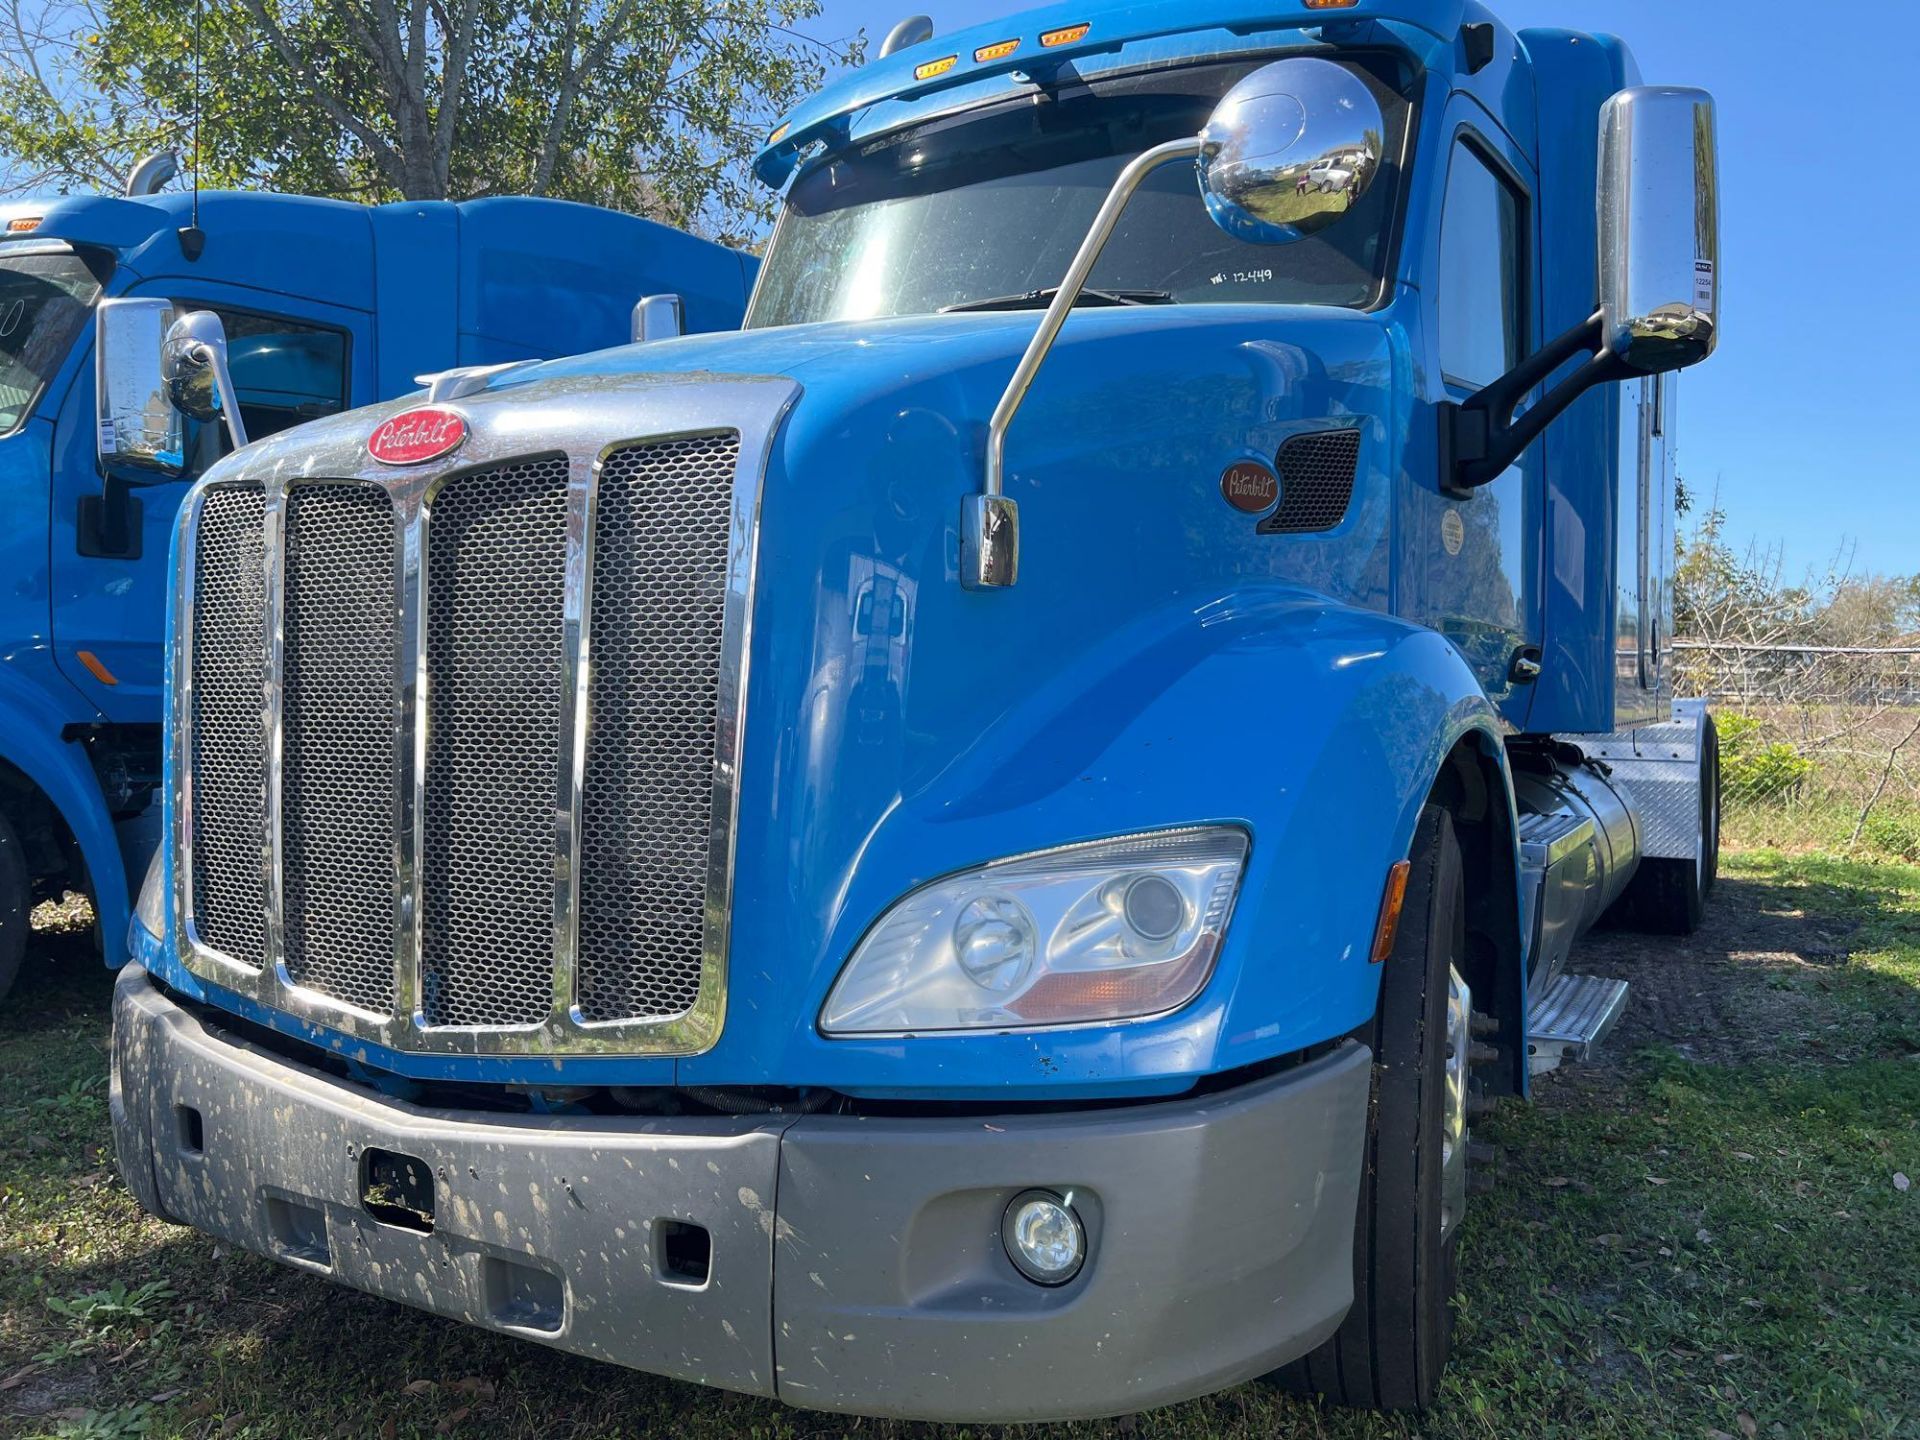 2014 PETERBILT 579 SEMI TRUCK W/SLEEPER CAB, PACCAR DIESEL ENGINE, 455 HP, AUTOMATIC TRANSMISSION - Image 11 of 34